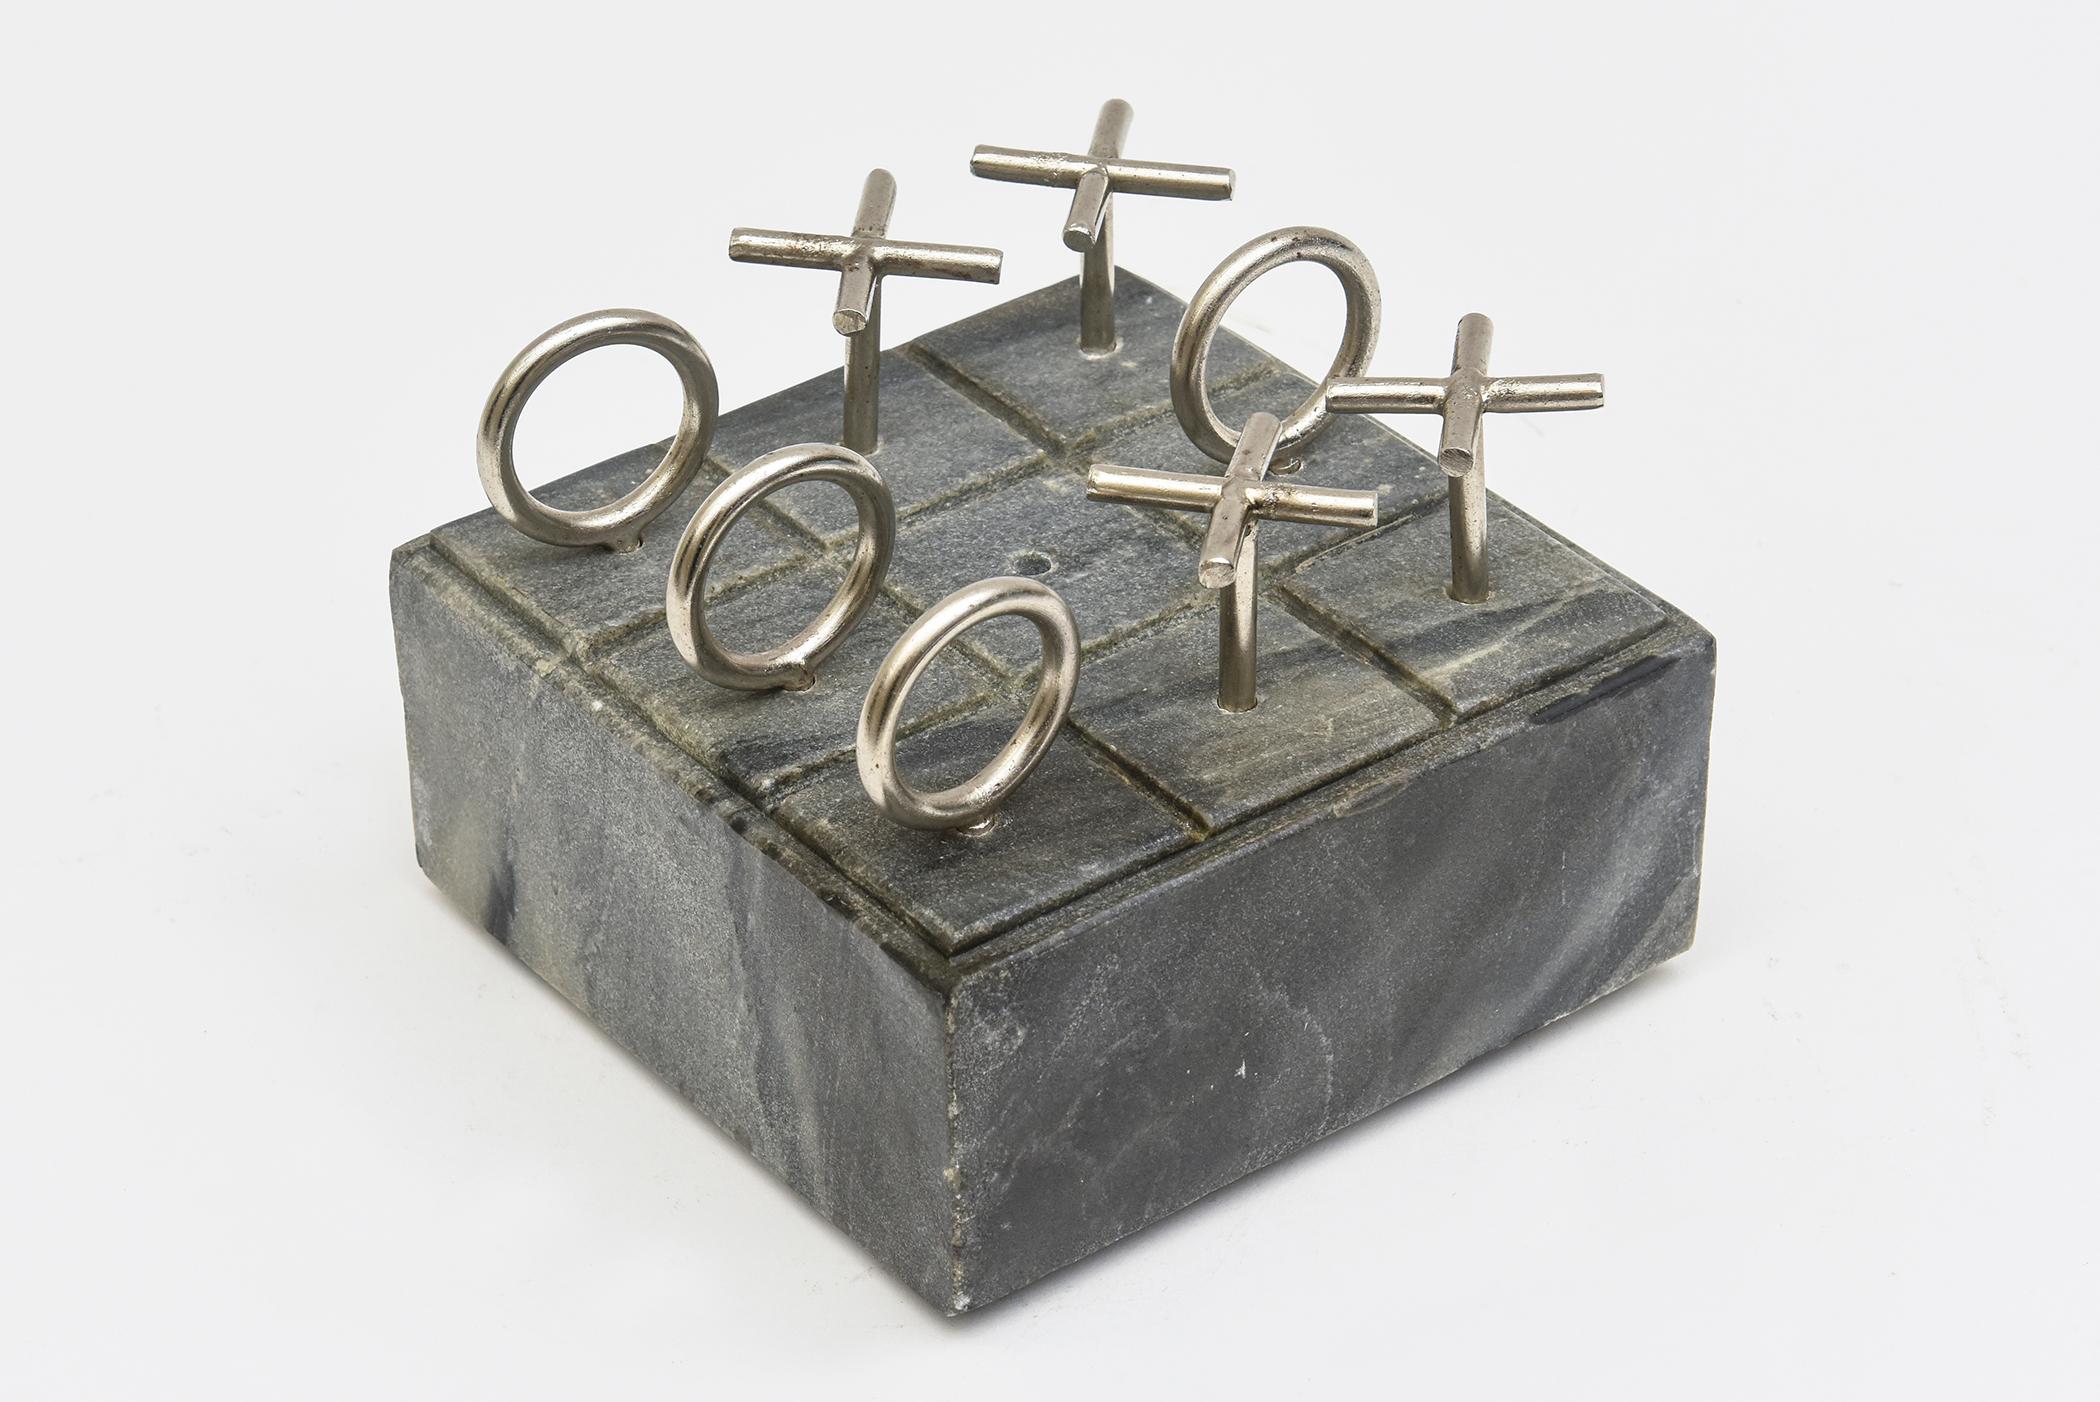 This vintage tic tac toe set game is on the original marble base. It is from the 70's. The XO players have not been re chrome plated. They have a bit of wear. The marble base is a blue black. Great also as a desk accessory.